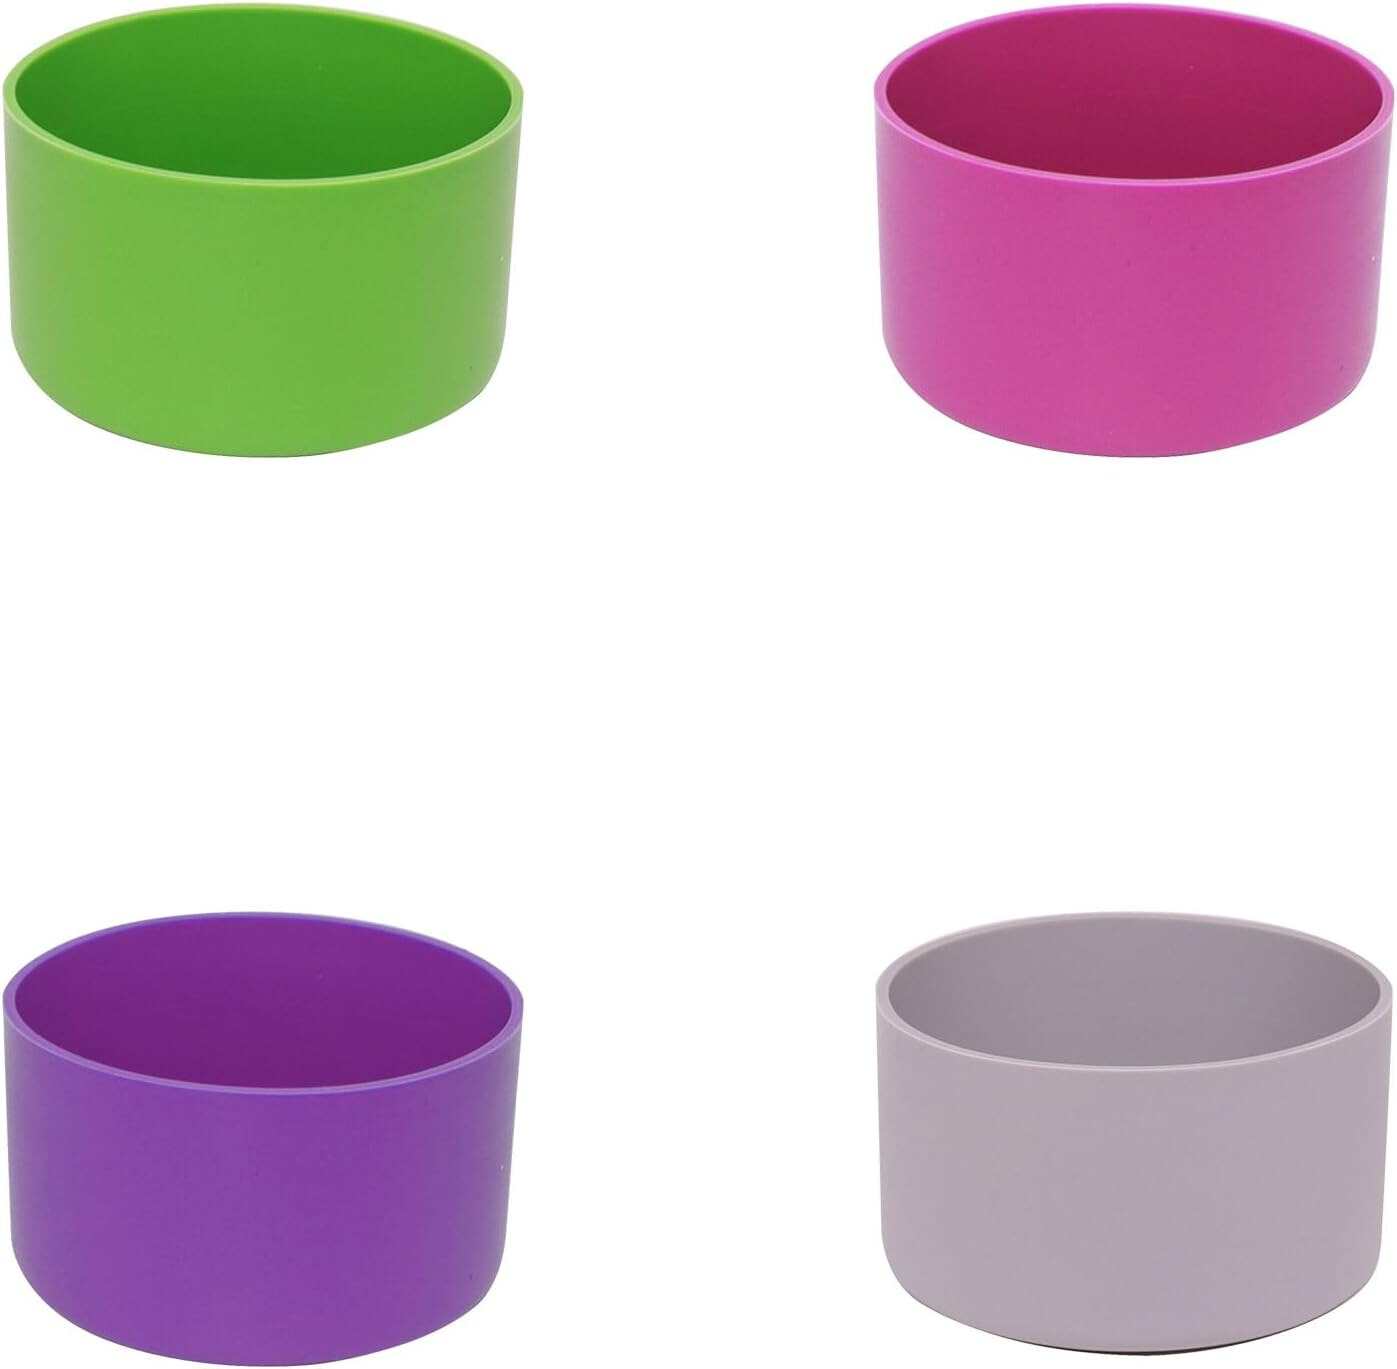 Silicone Tumbler Protector In 20 Color Choices